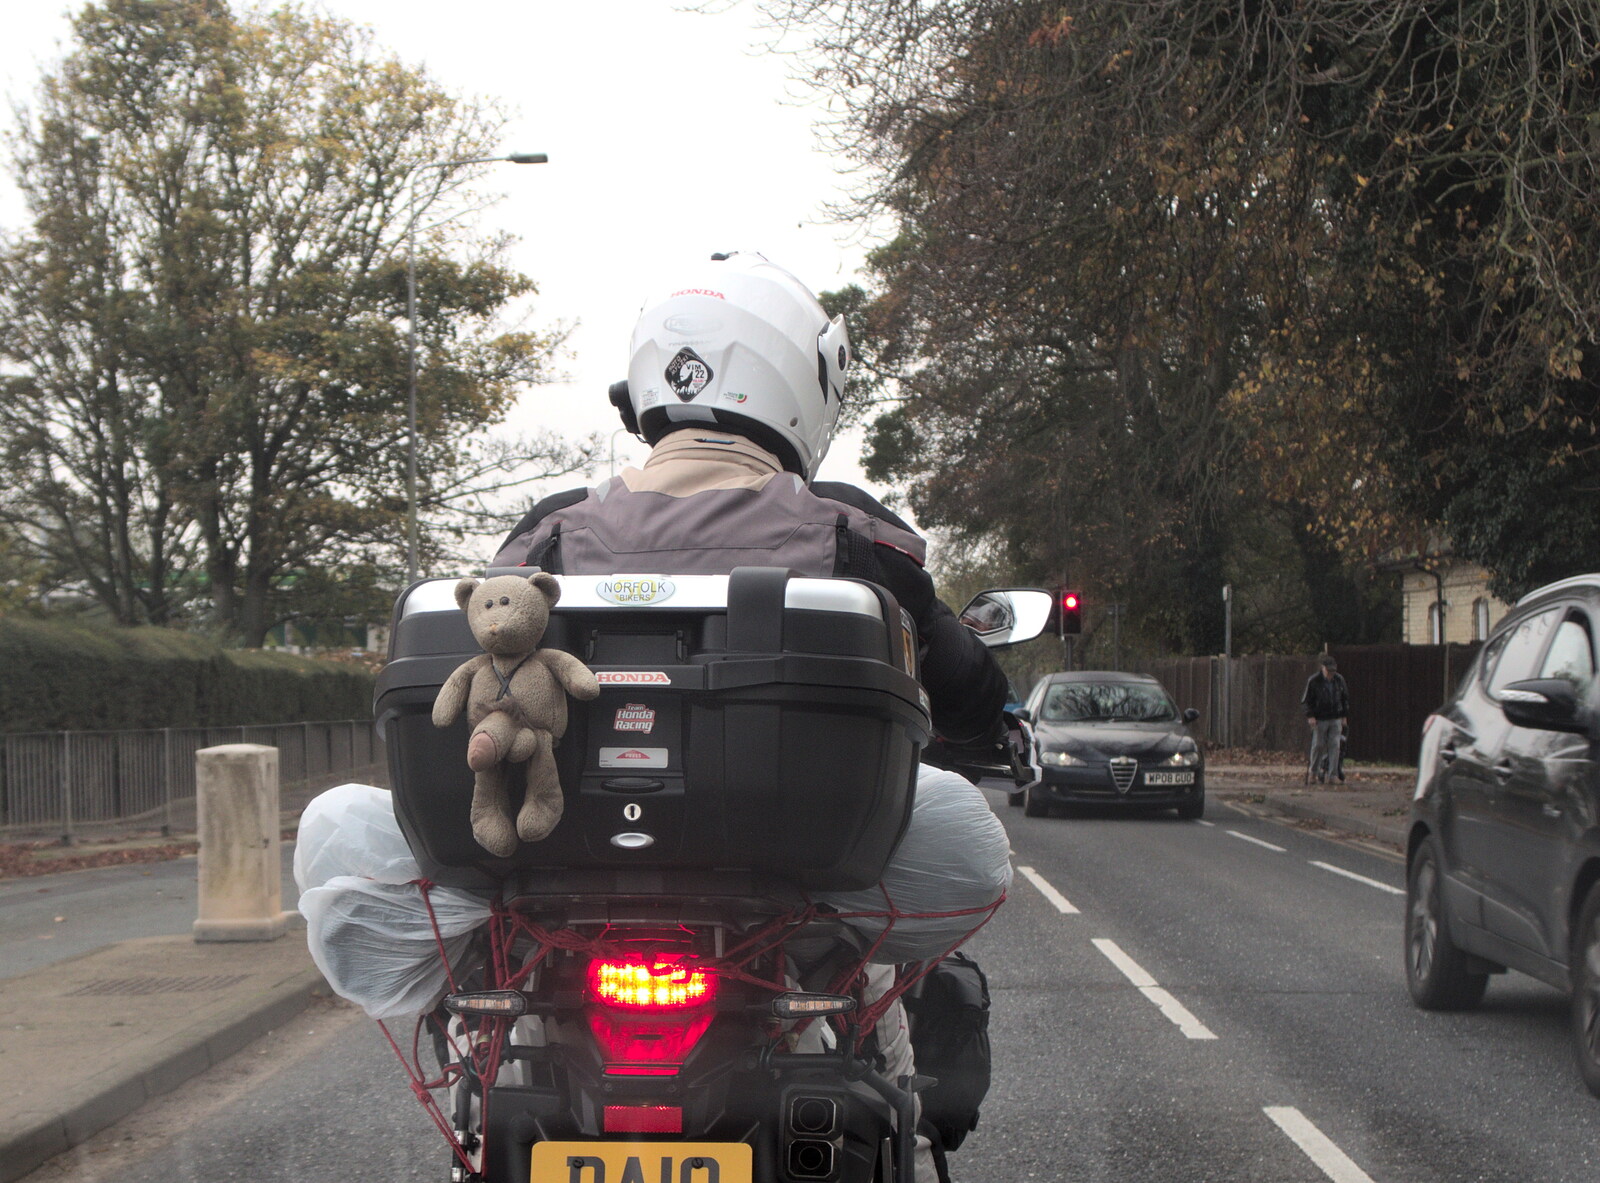 There's a rude teddy bear on Norwich Road, Ipswich from The GSB at Wickham Skeith, Suffolk - 19th November 2022